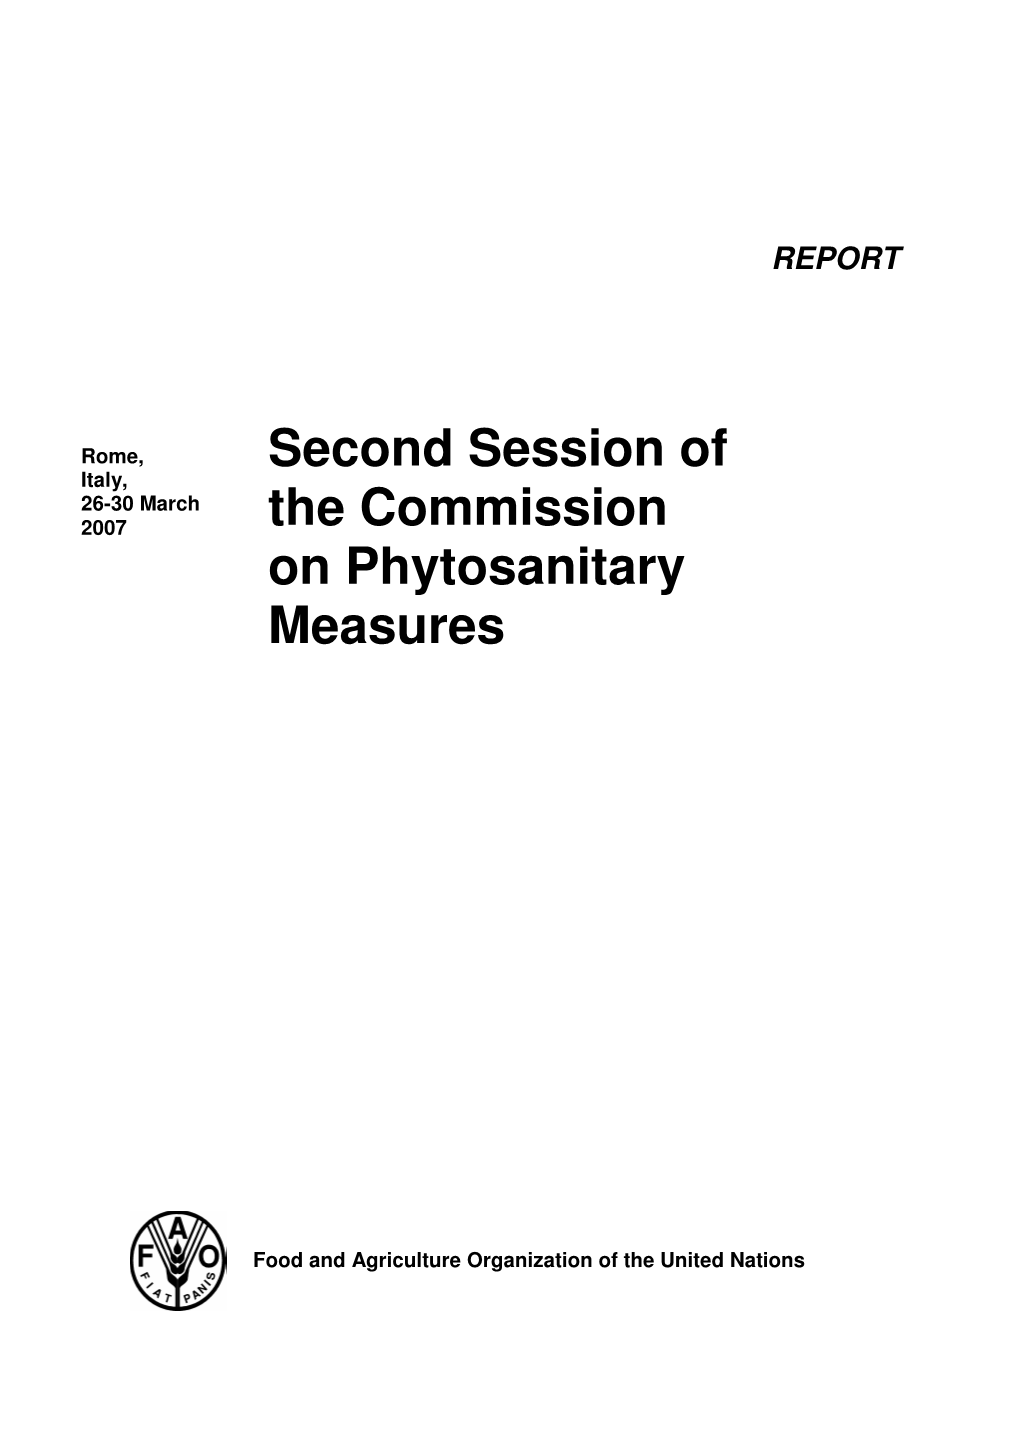 Second Session of the Commission on Phytosanitary Measures